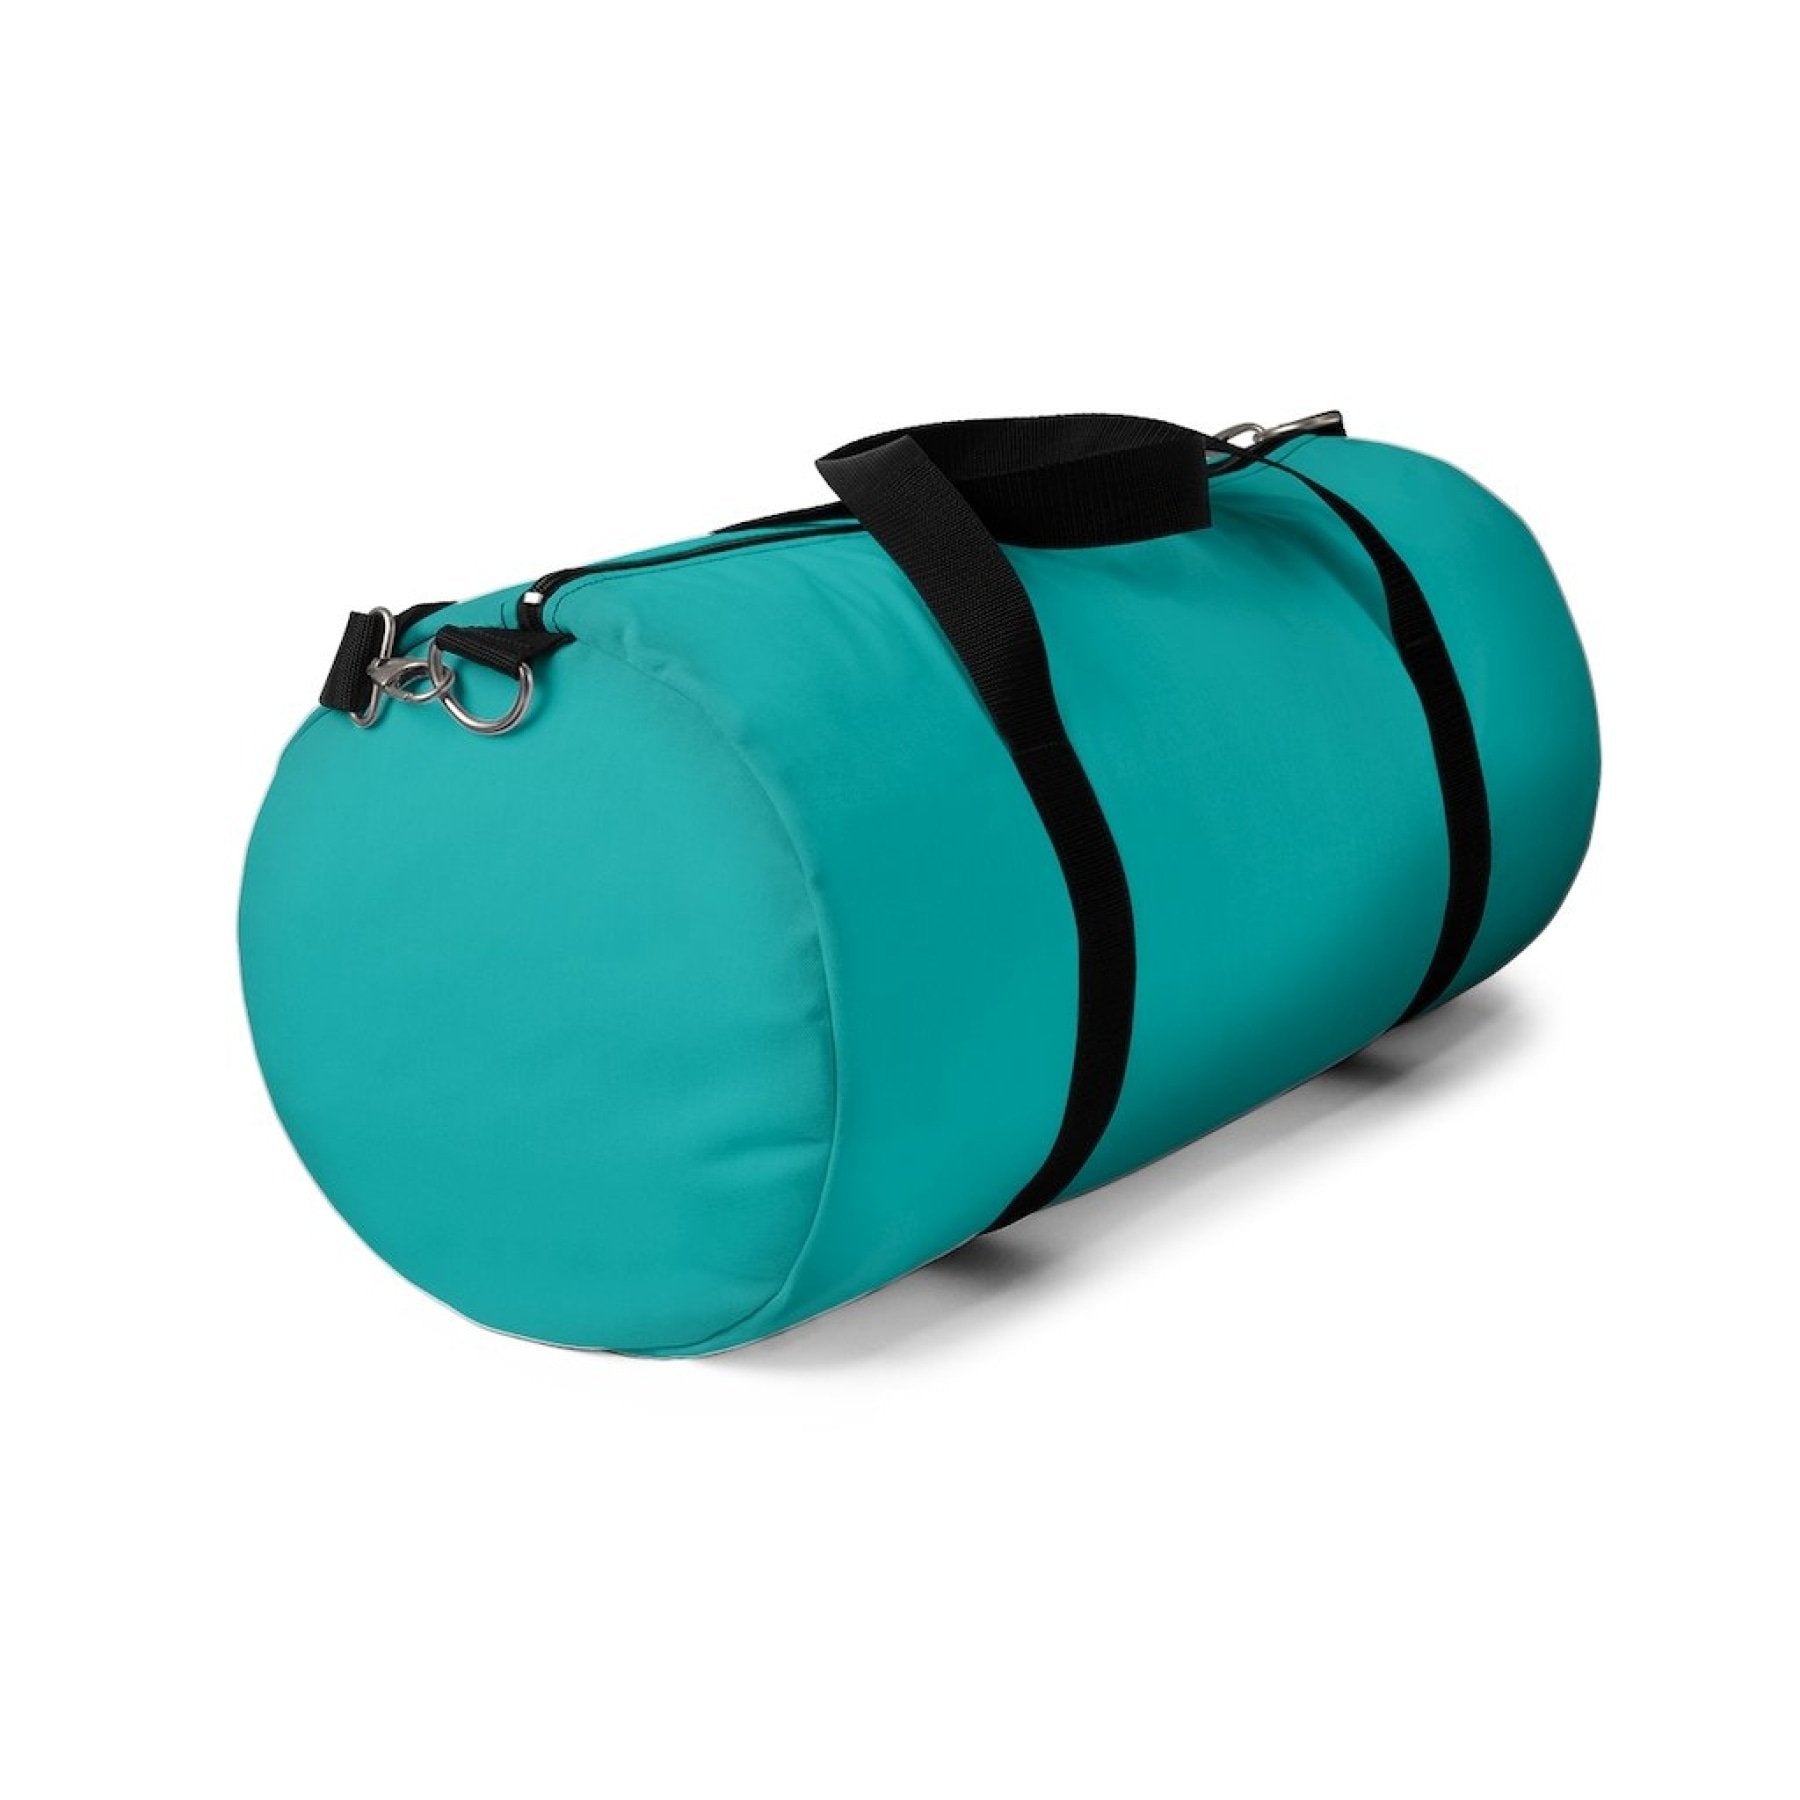 Duffel Bag, Carry On Luggage, Teal Green